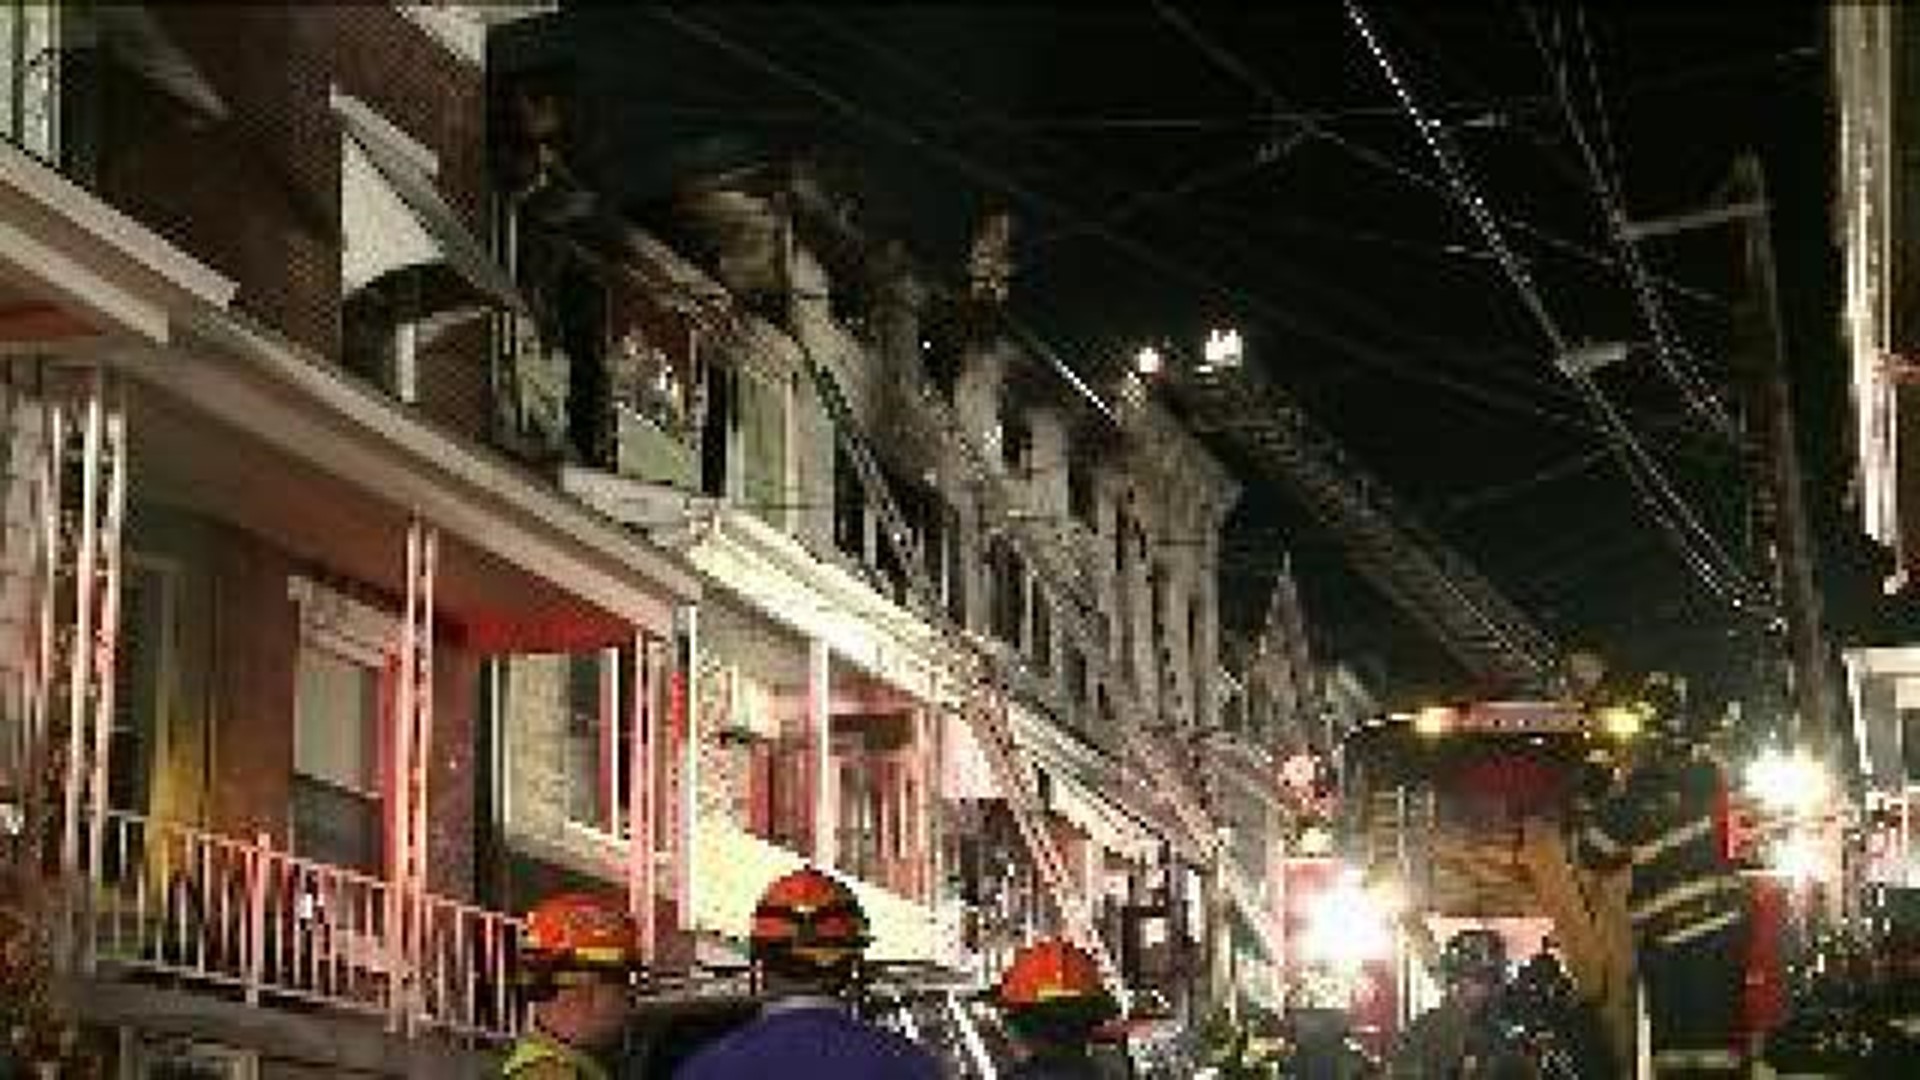 Fire In Four Apartments Displaces 10 People